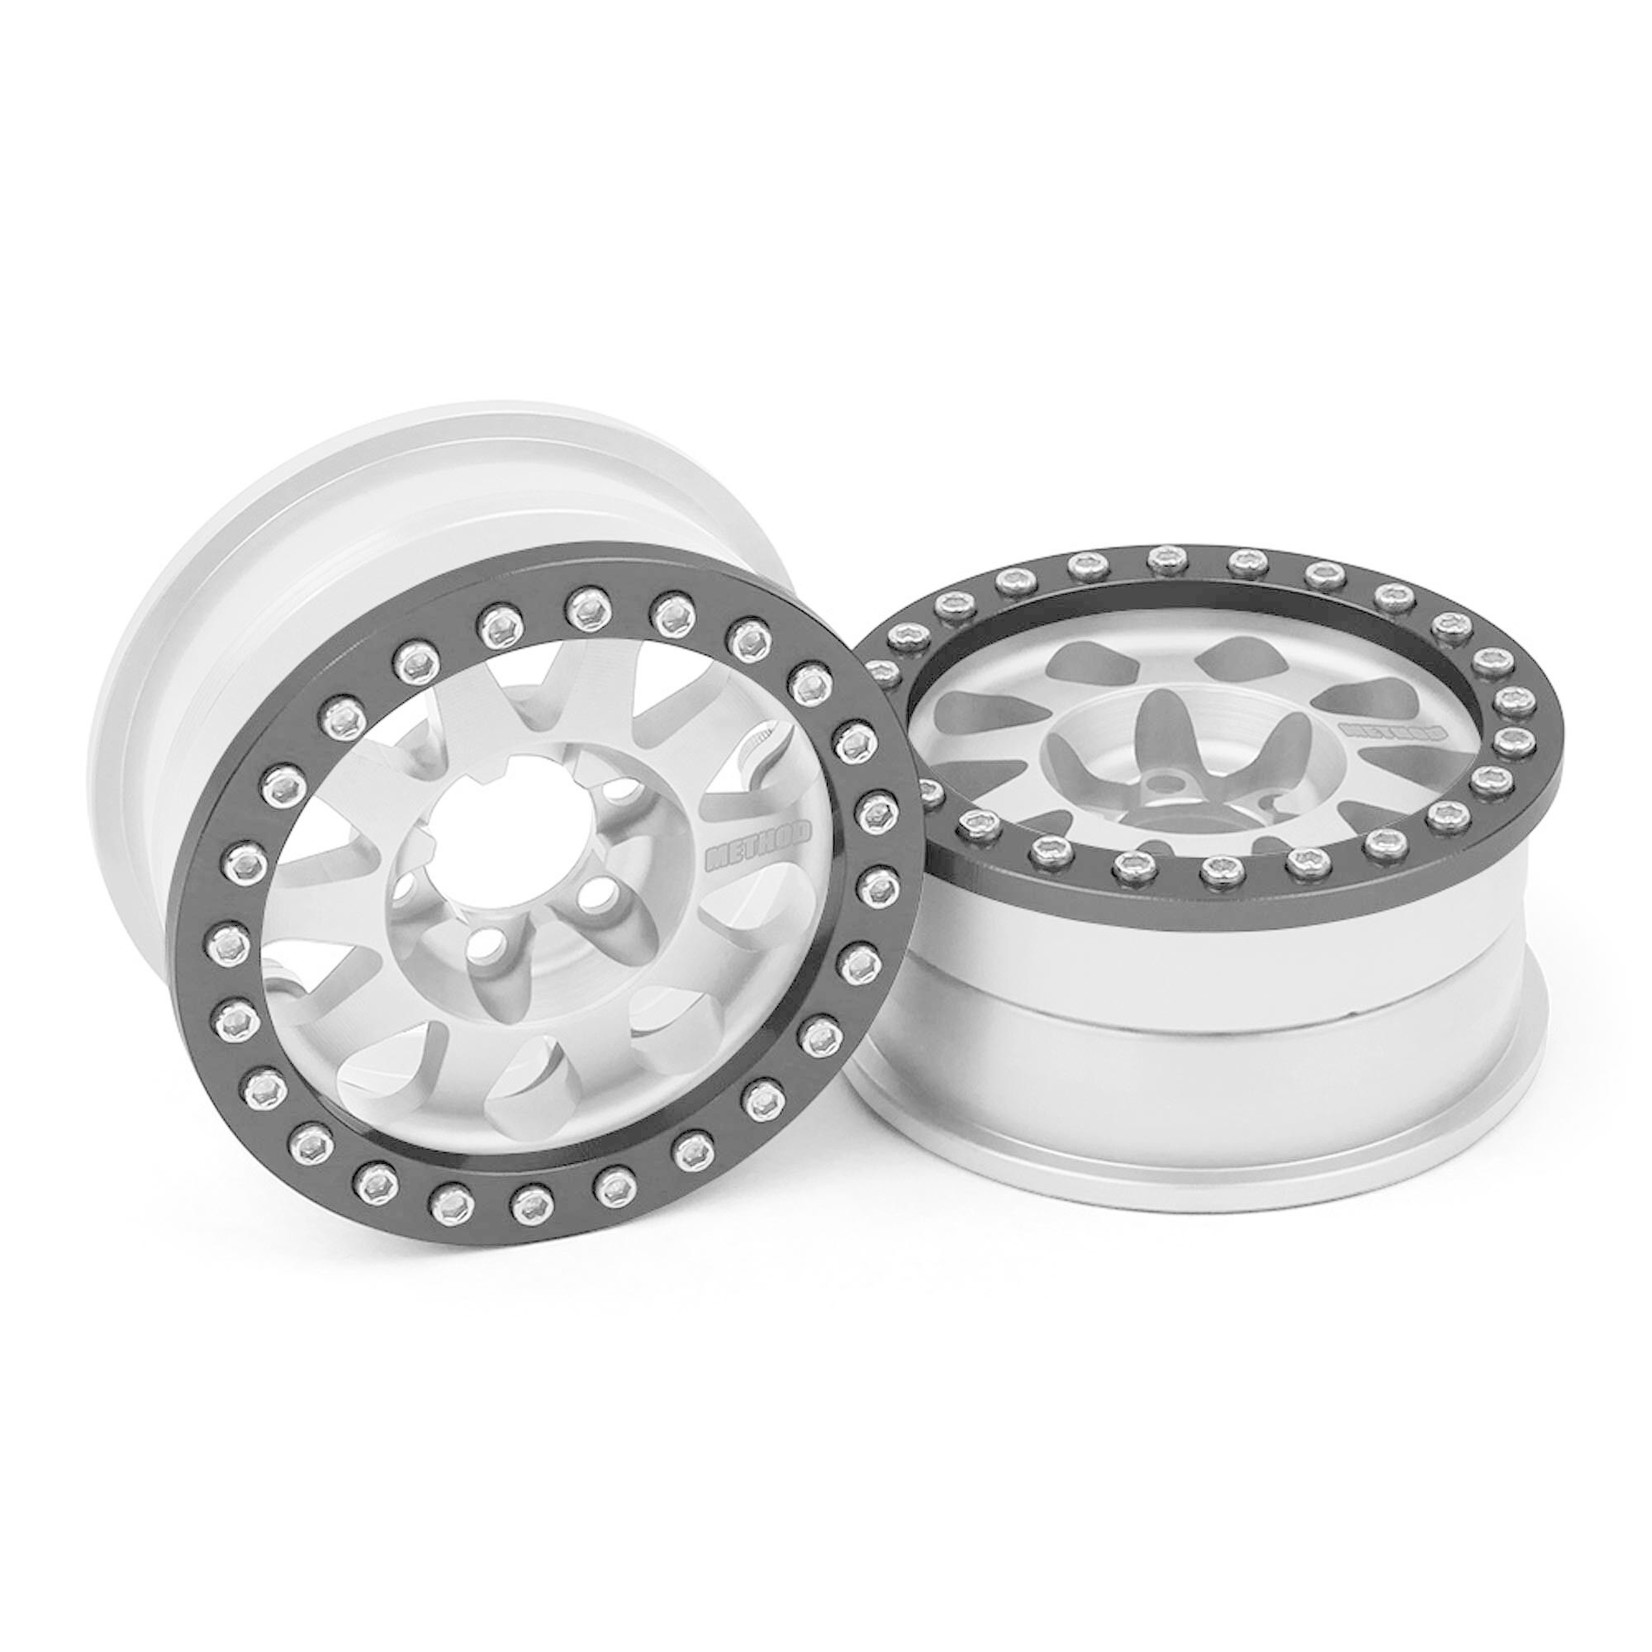 Vanquish Products 1/10 Method 101 V2 1.9 Race Crawler Wheels, 12mm Hex, Clear Anodized (2)